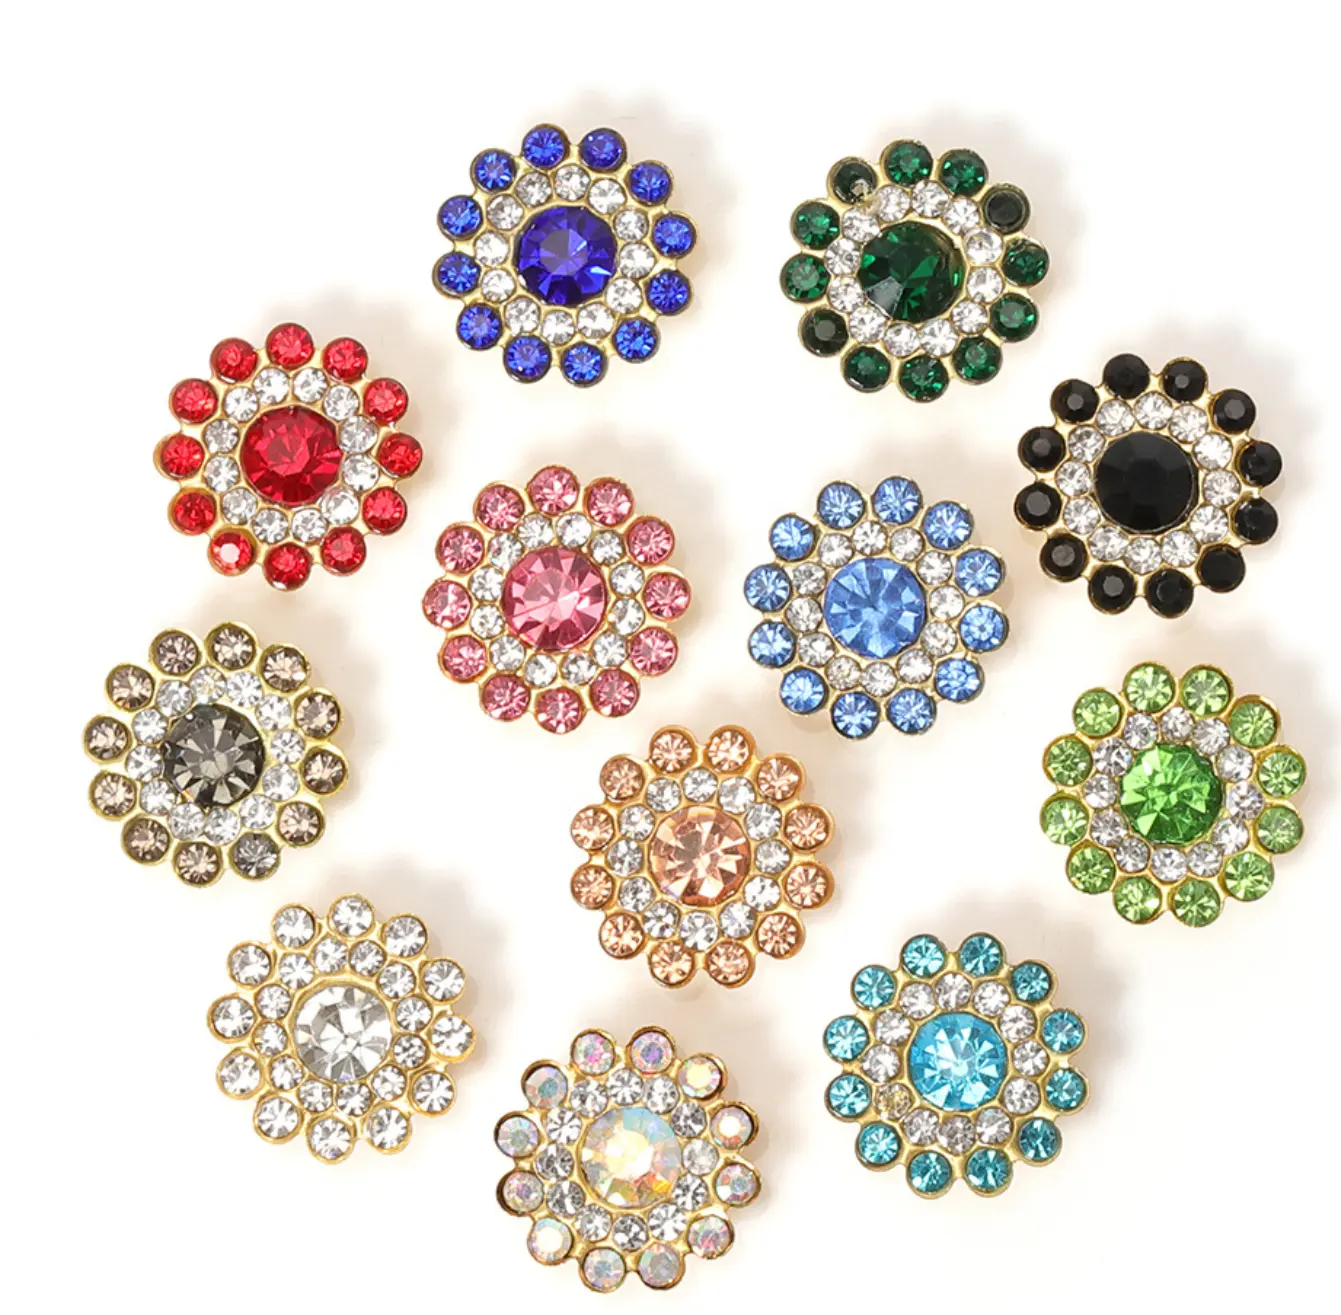 200pcs/Bag Colorful Rhinestone Metal Buttons Flower Domed Sewing Loop Shank Button For Clothing Accessories